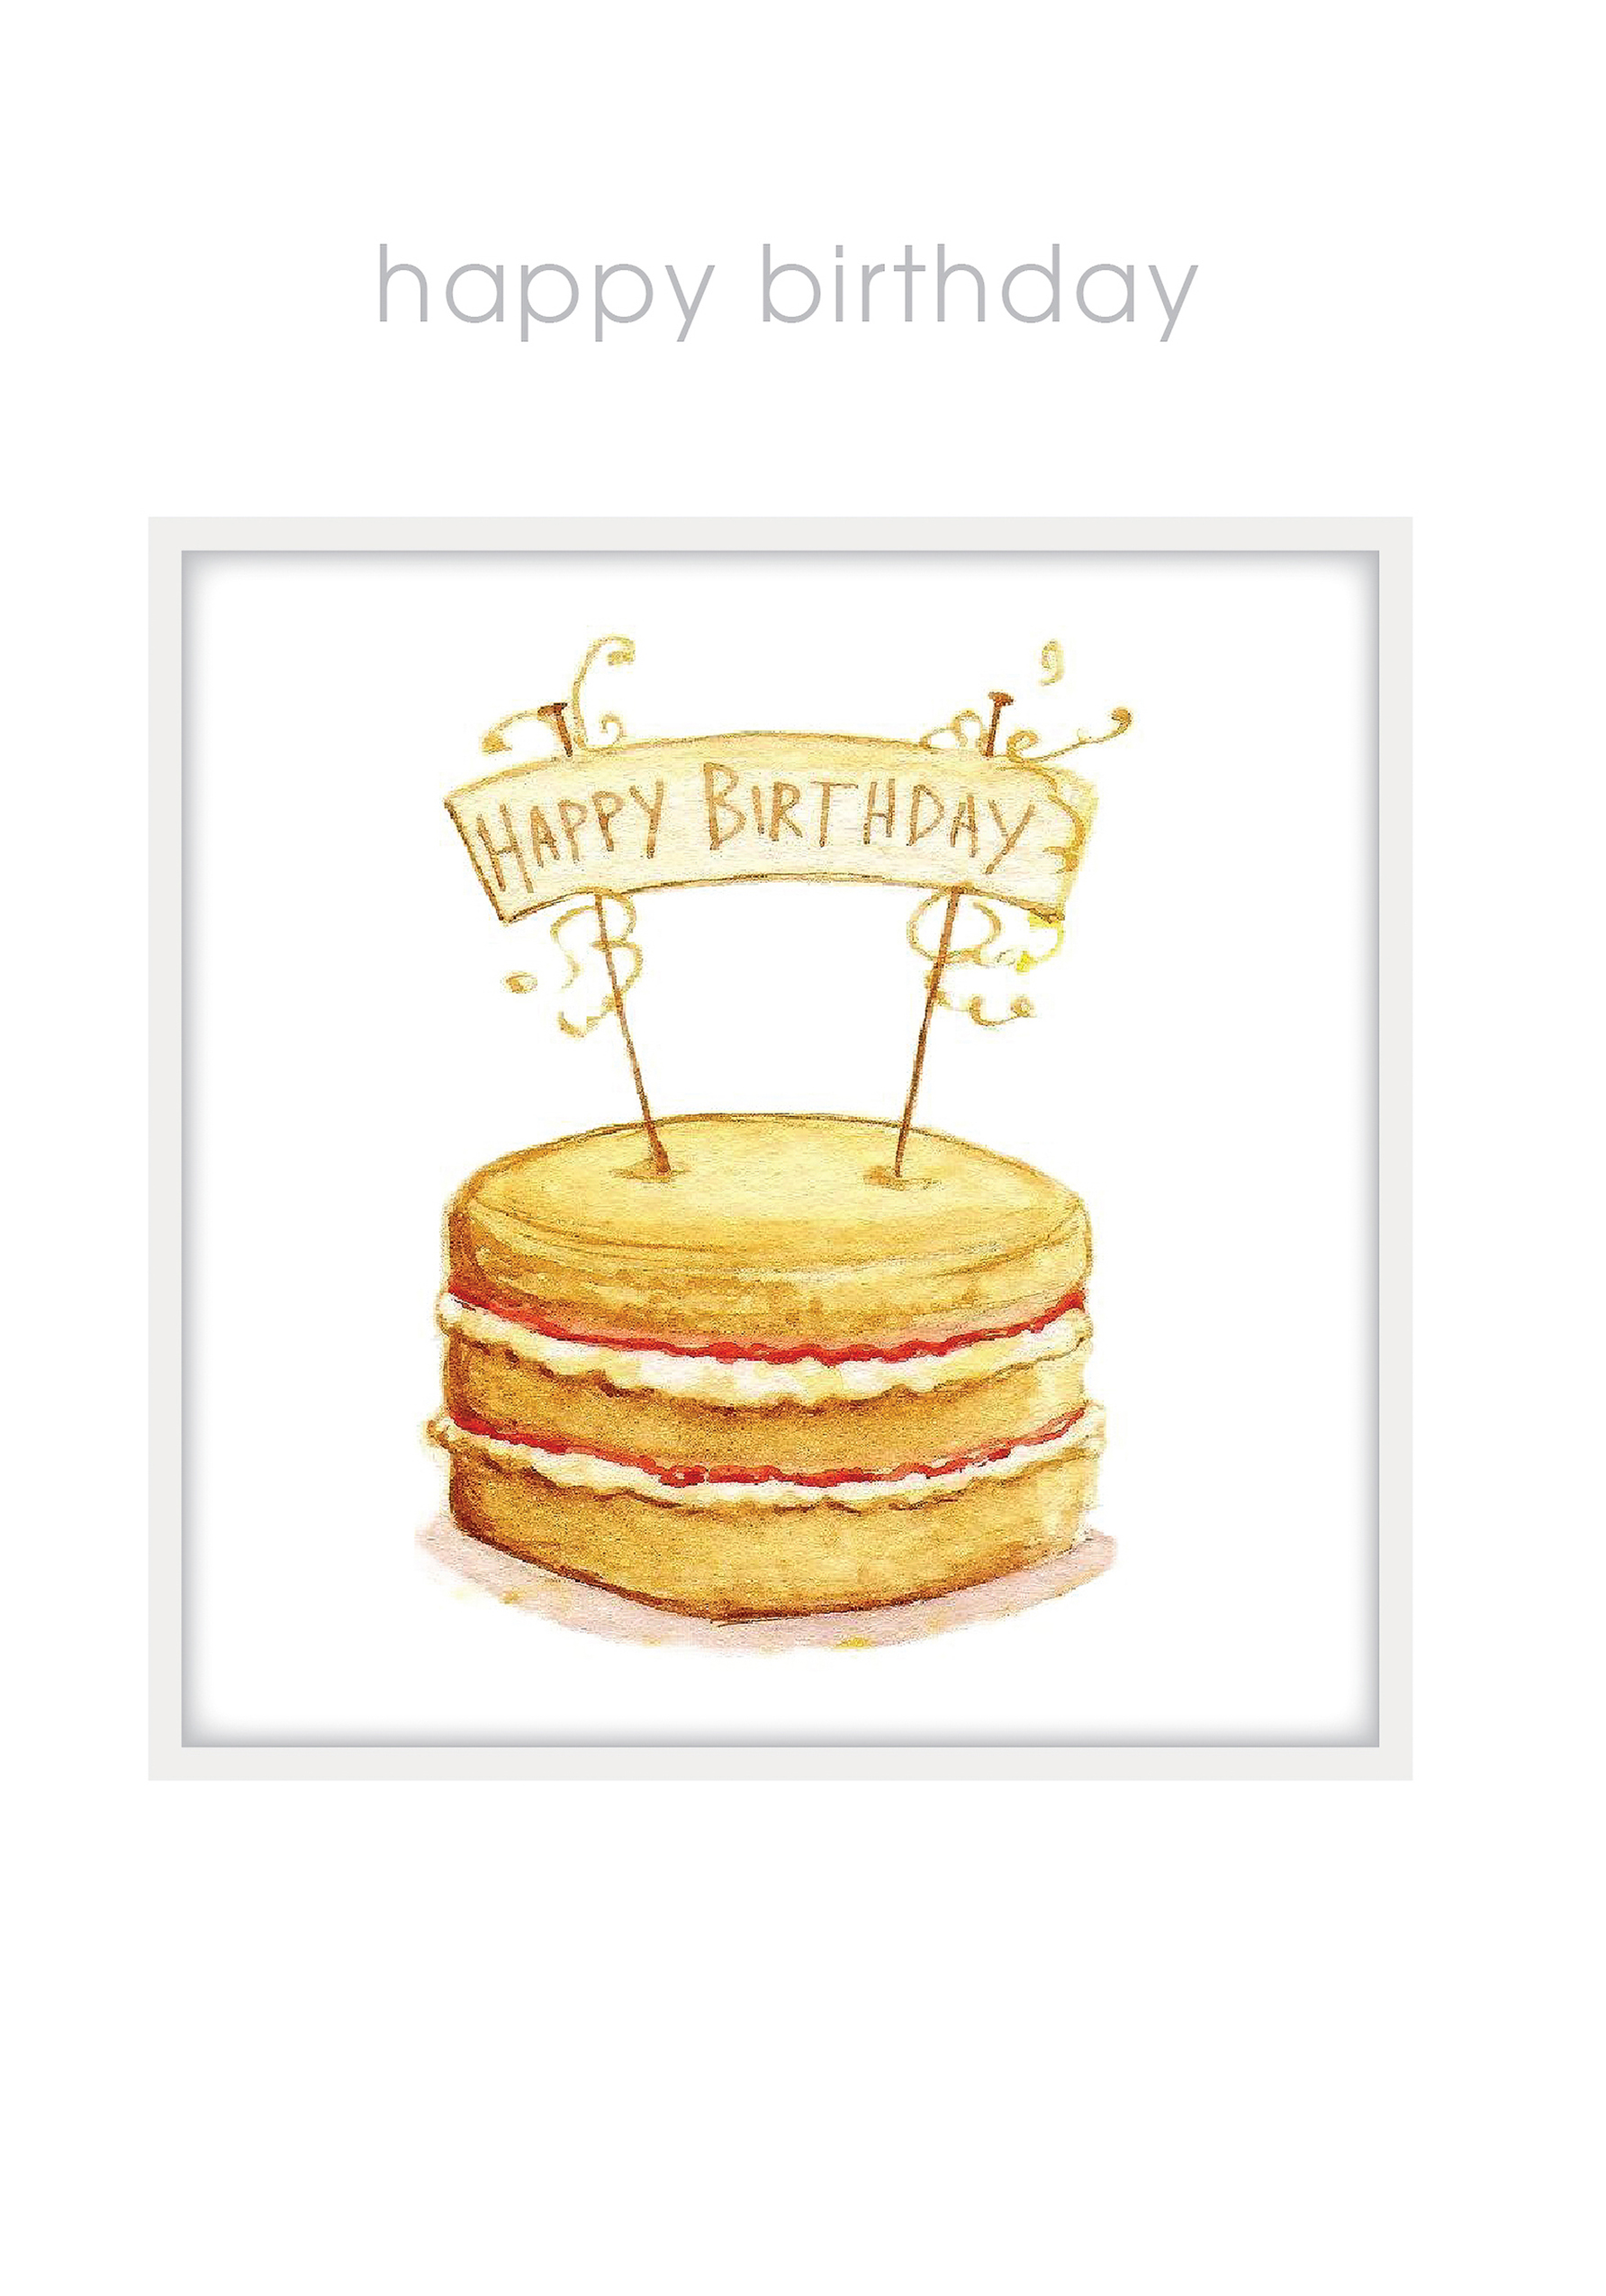 Happy birthday greeting card with cake Royalty Free Vector